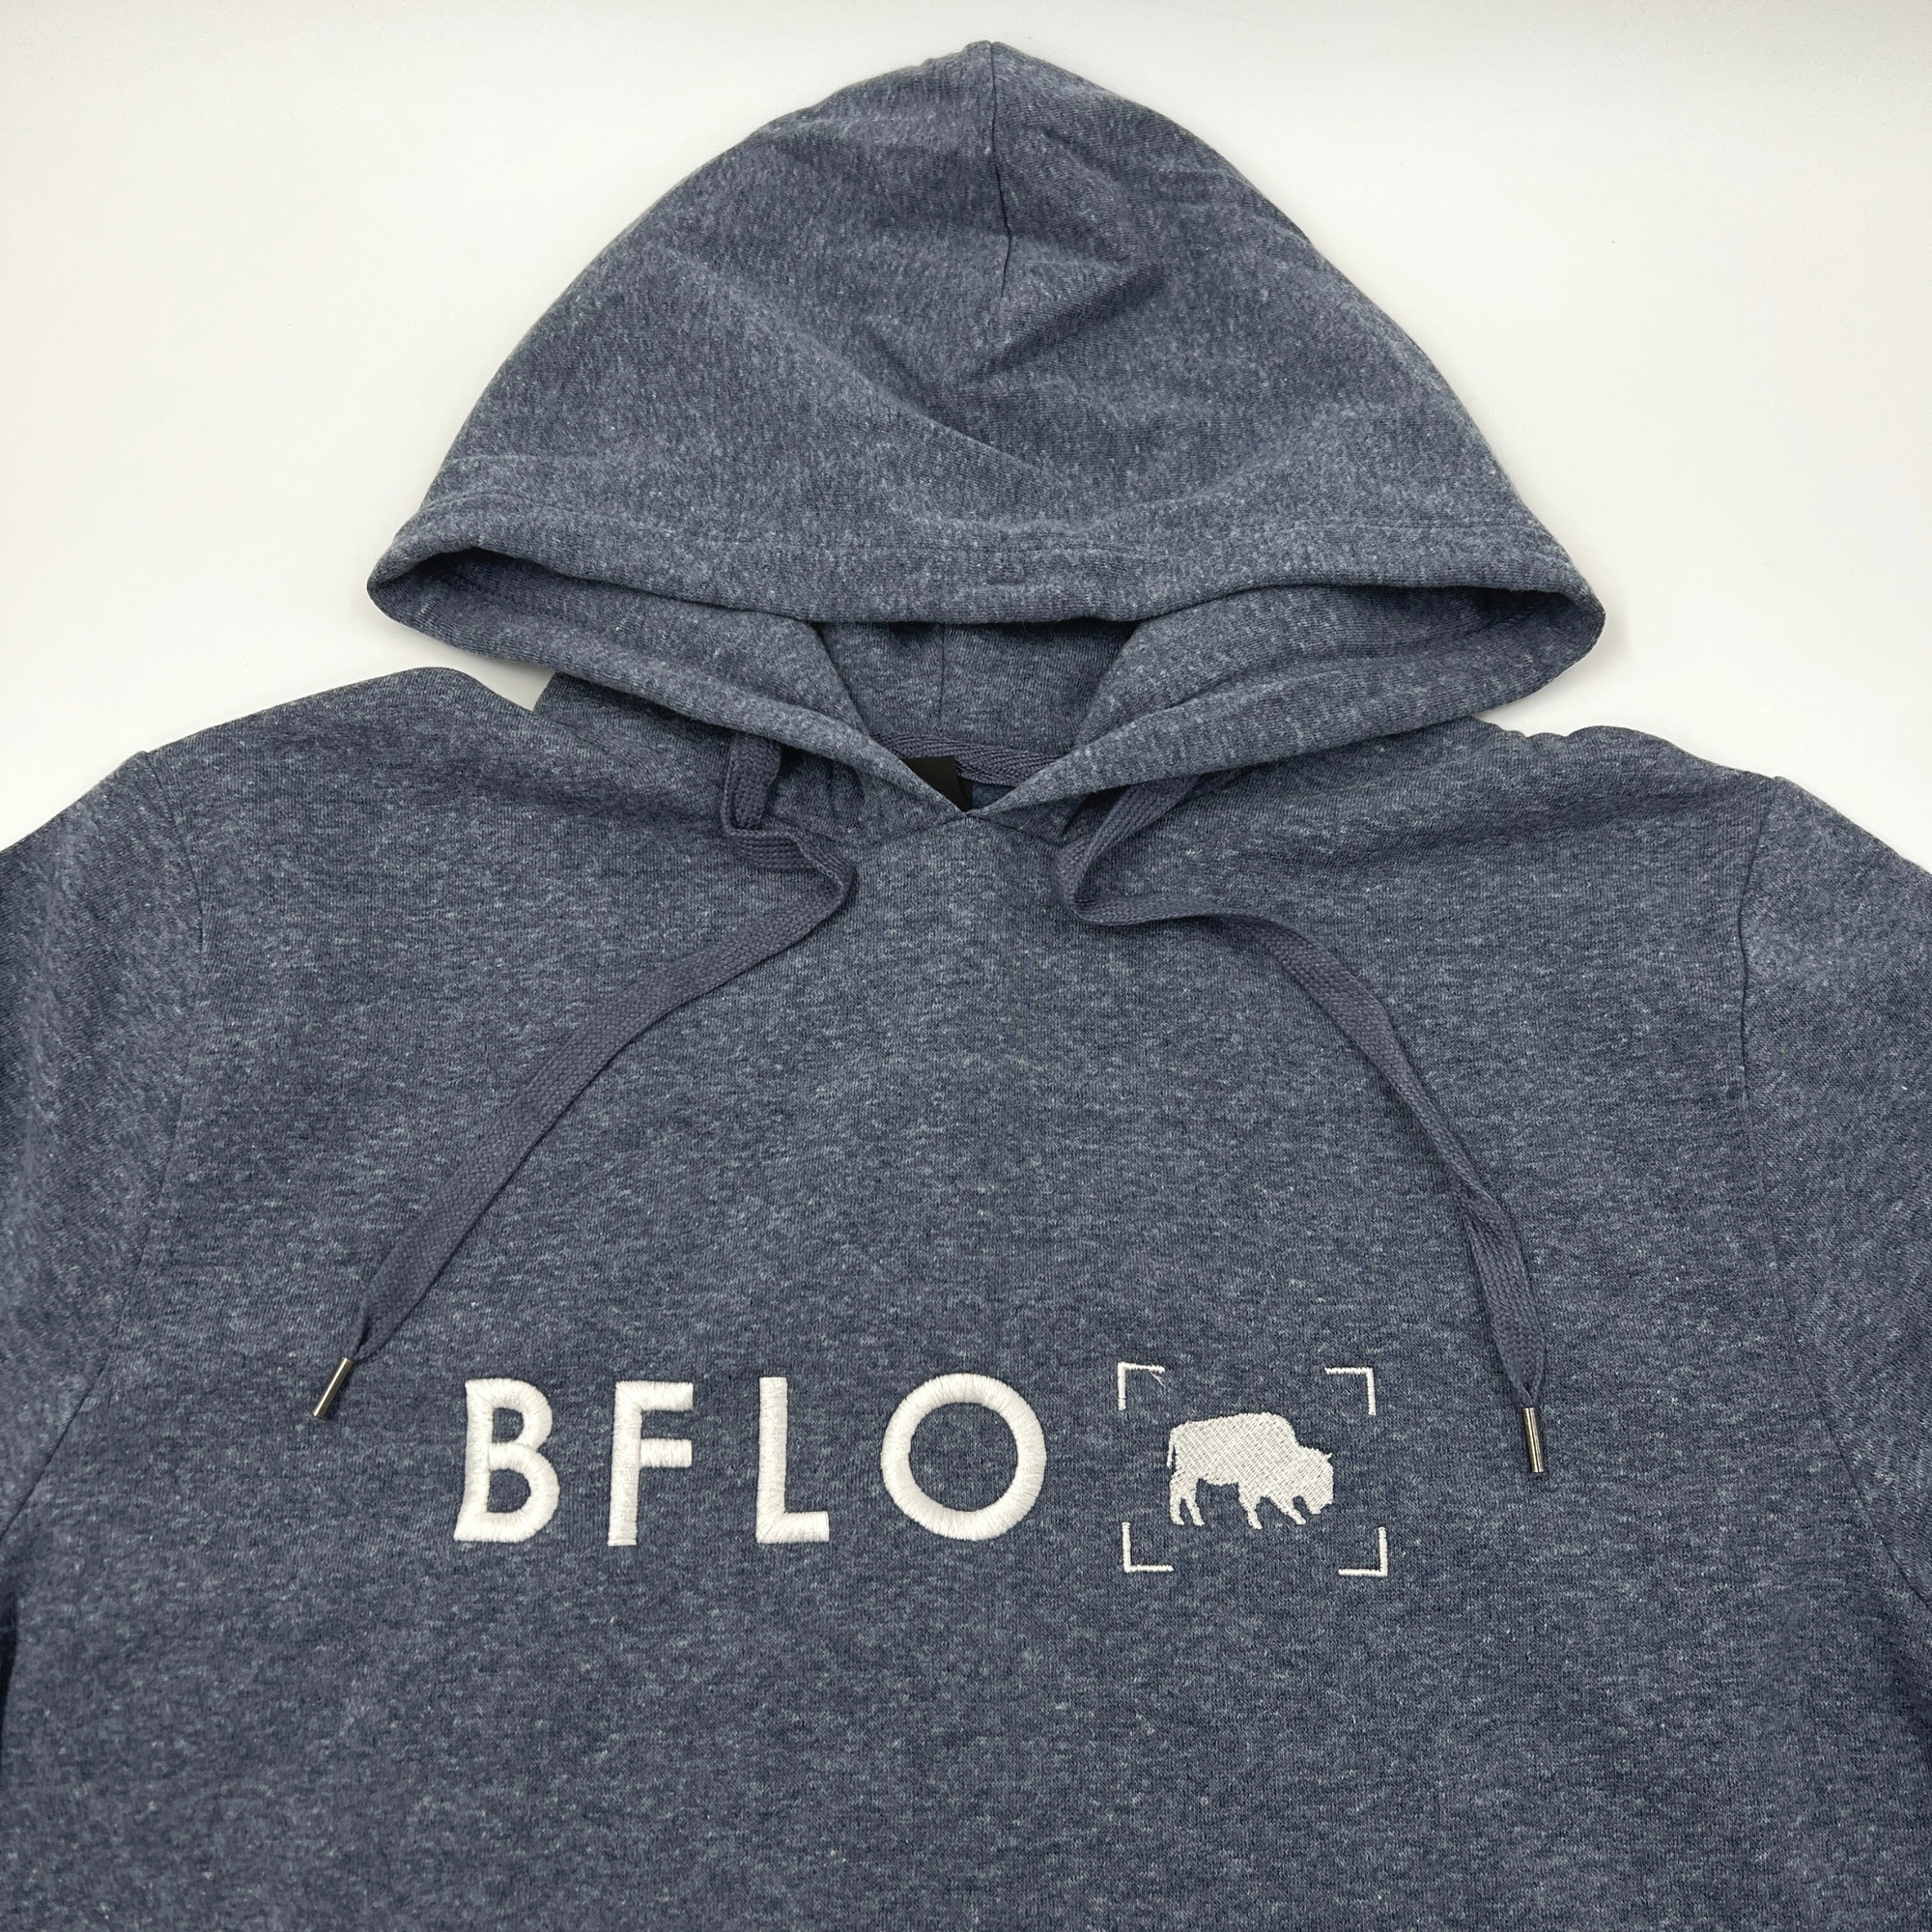 BFLO Embroidered Heather Navy Hoodie